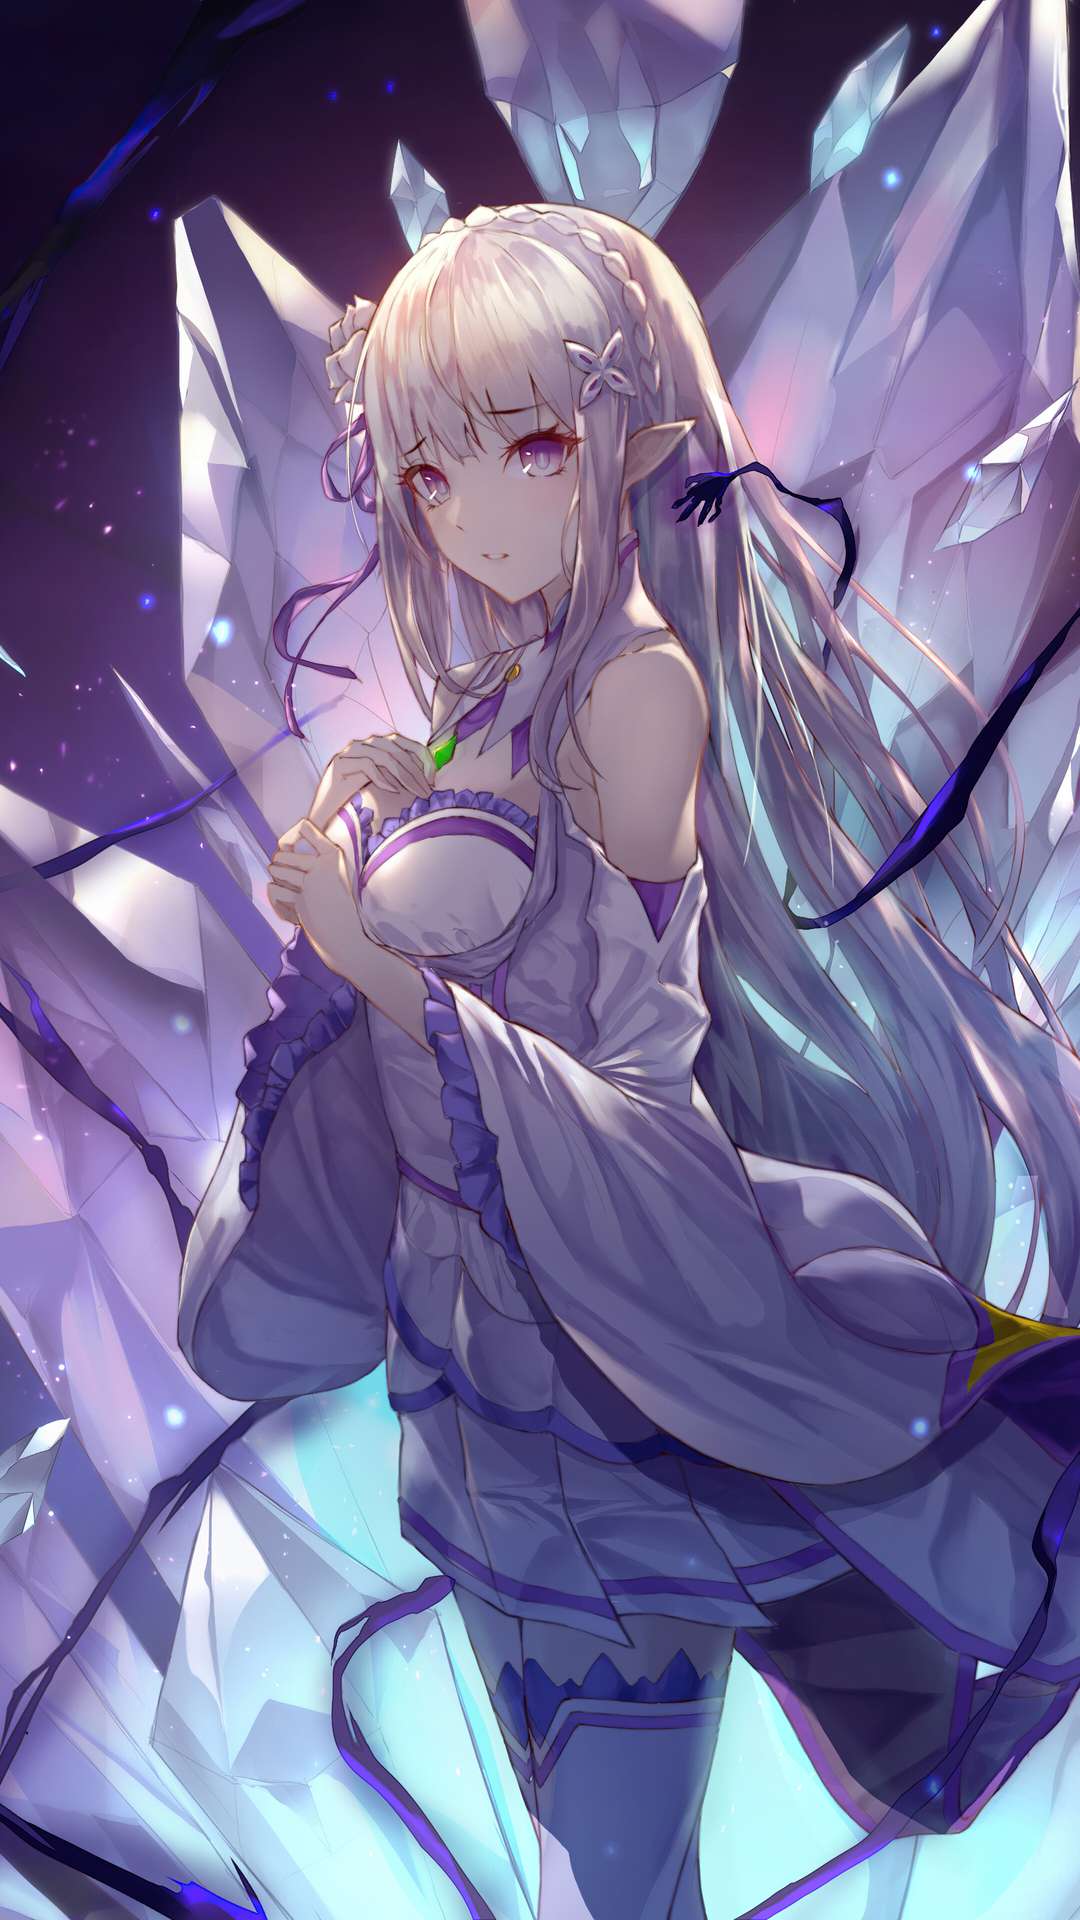 9+ Emilia Re Zero Wallpapers for iPhone and Android by Sara Byrd